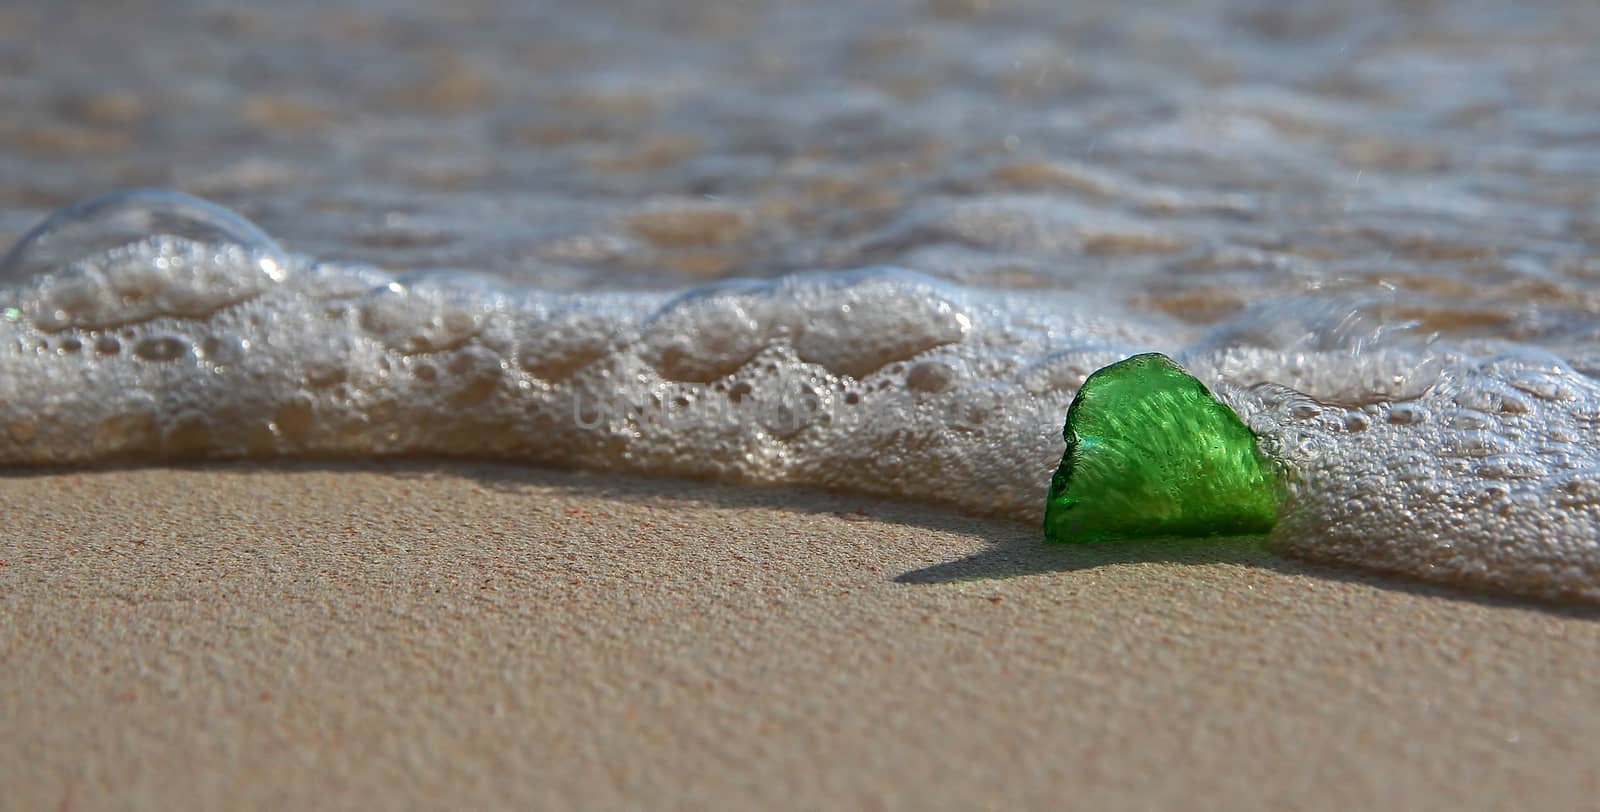 A close up of a heart shaped, single piece of green sea glass, on a tropical beach, with a breaking wave near the glass